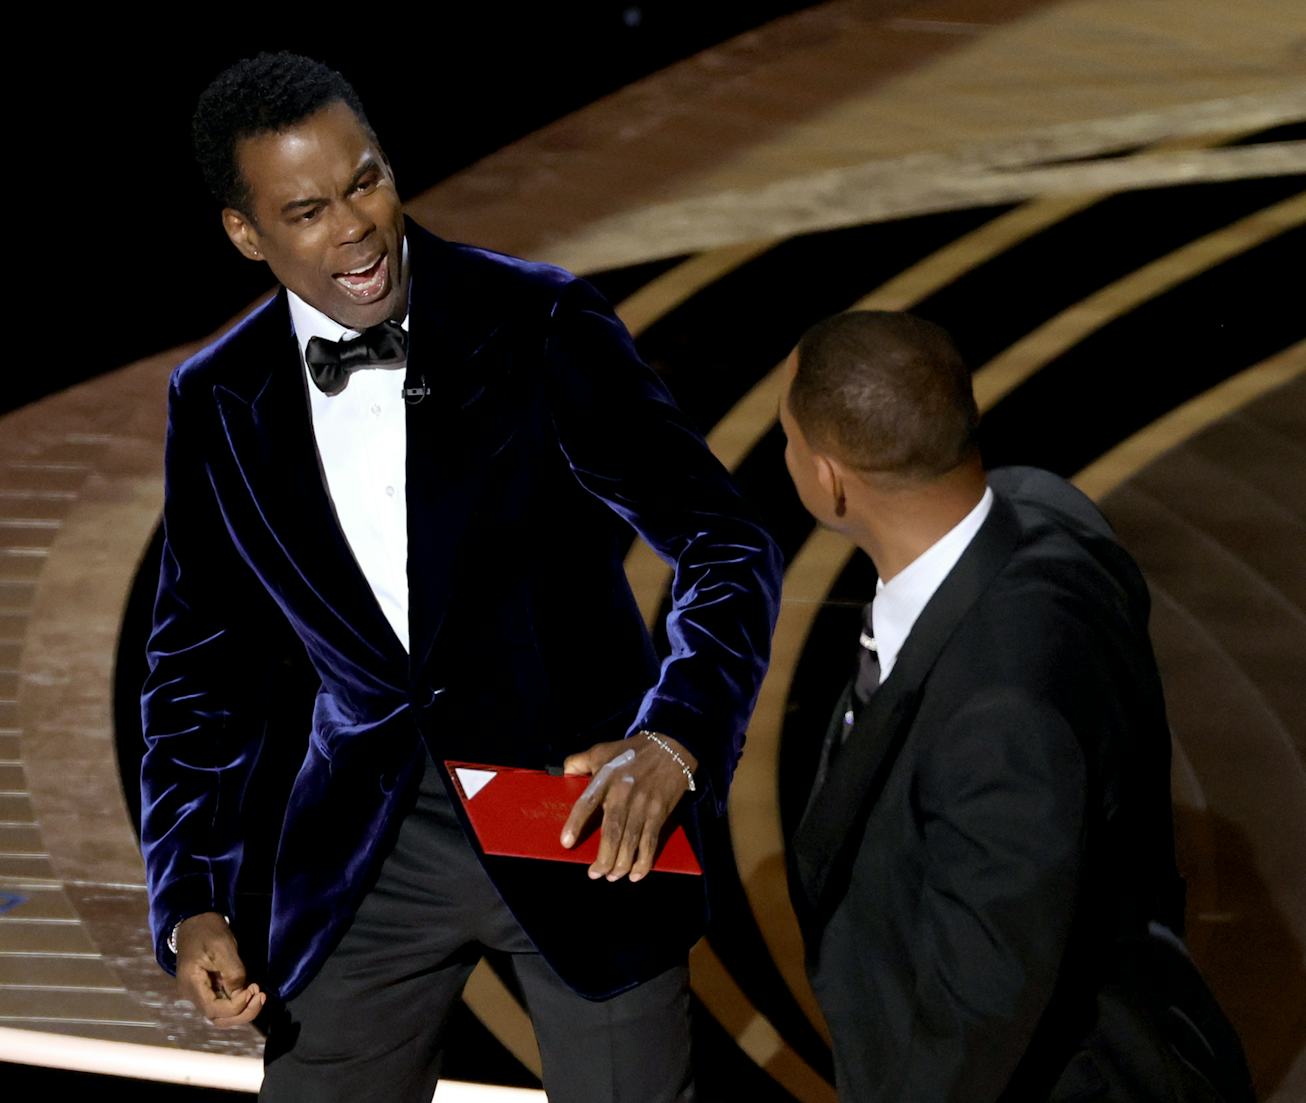 HOLLYWOOD, CALIFORNIA - MARCH 27: (L-R) Chris Rock and Will Smith are seen onstage during the 94th A...